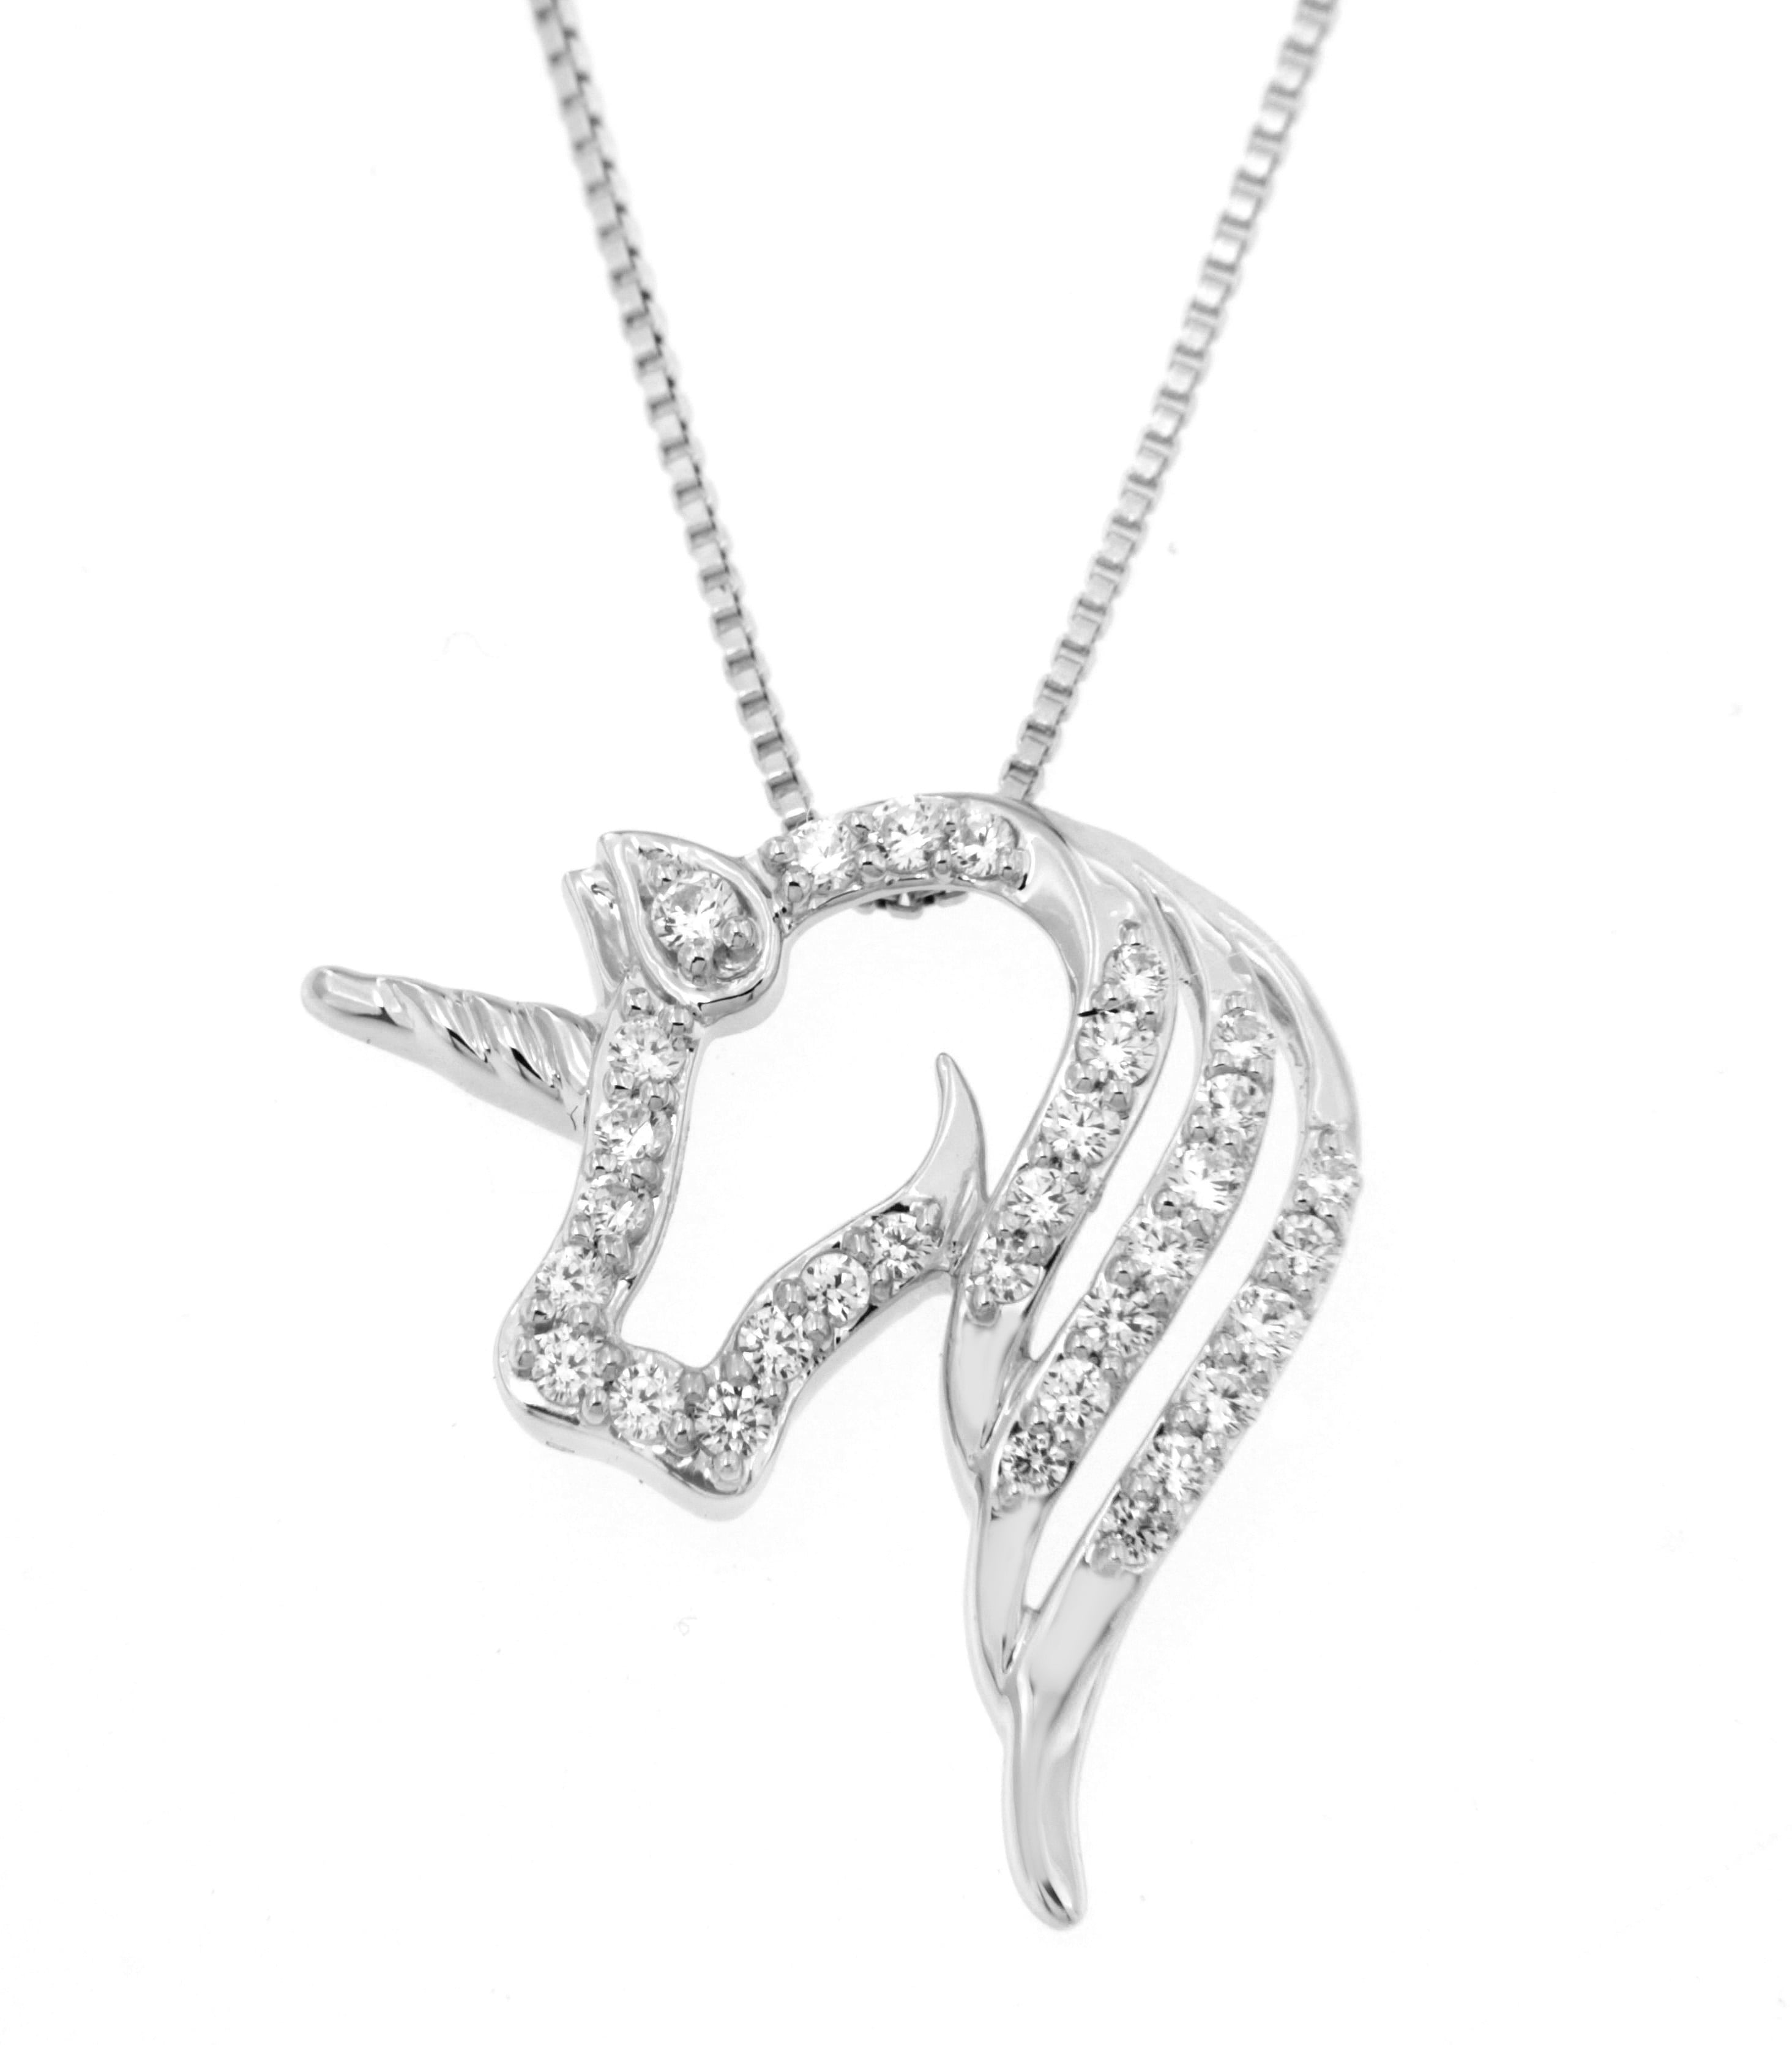 NATALIA DRAKE 1/4 Diamond Unicorn Necklace on 18 inch Chain in Rhodium  Plated Sterling Silver for Women (Color HI / Clarity I2)